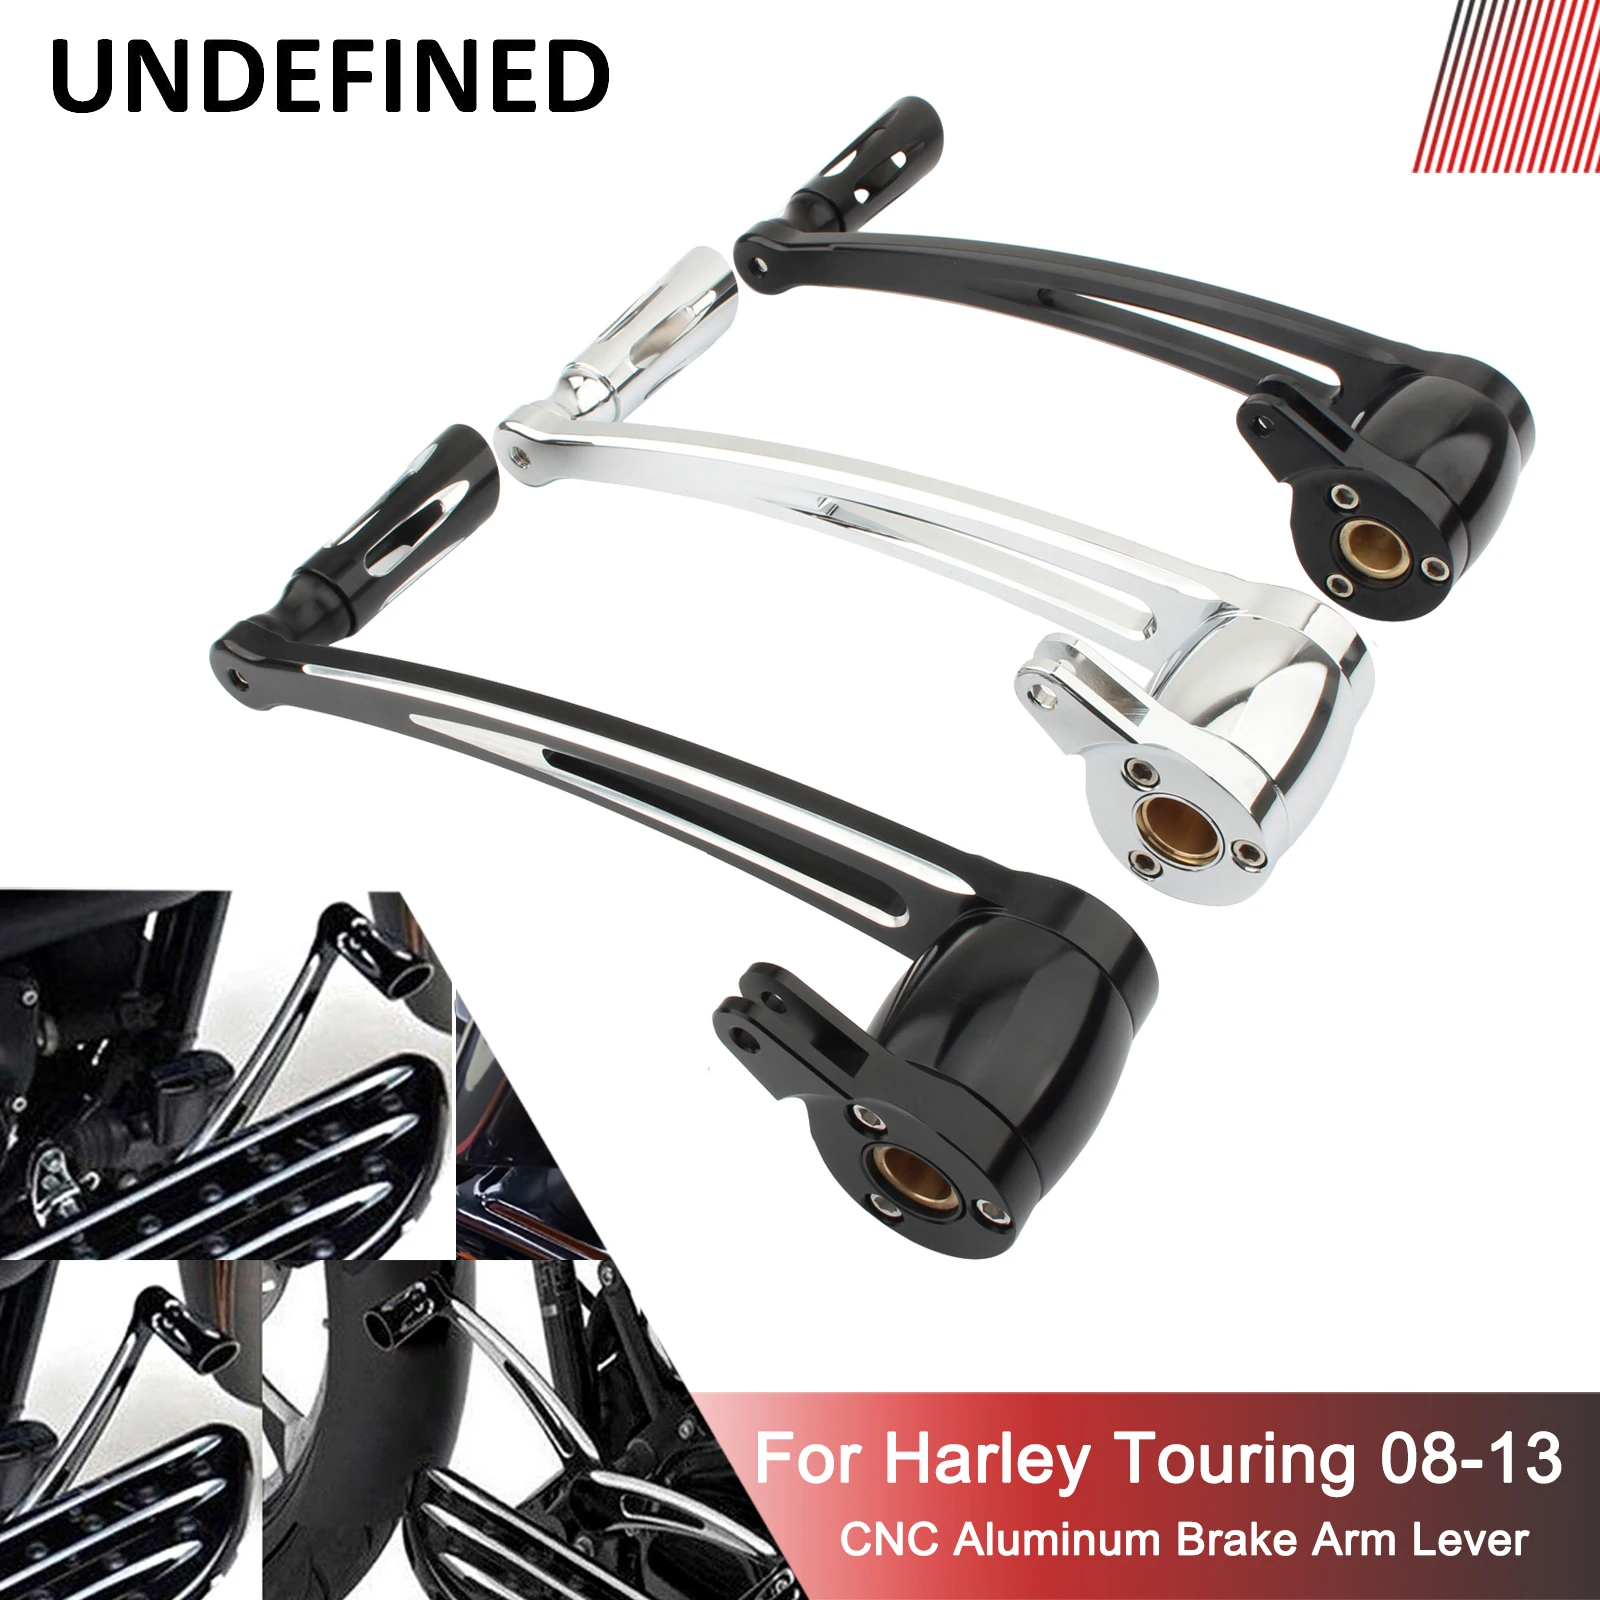 

Motorcycle Brake Arm Lever 16mm W/ Shifter Pegs for Harley Touring Street Glide Road Glide Road King Electra Glide Tri 2008-2013